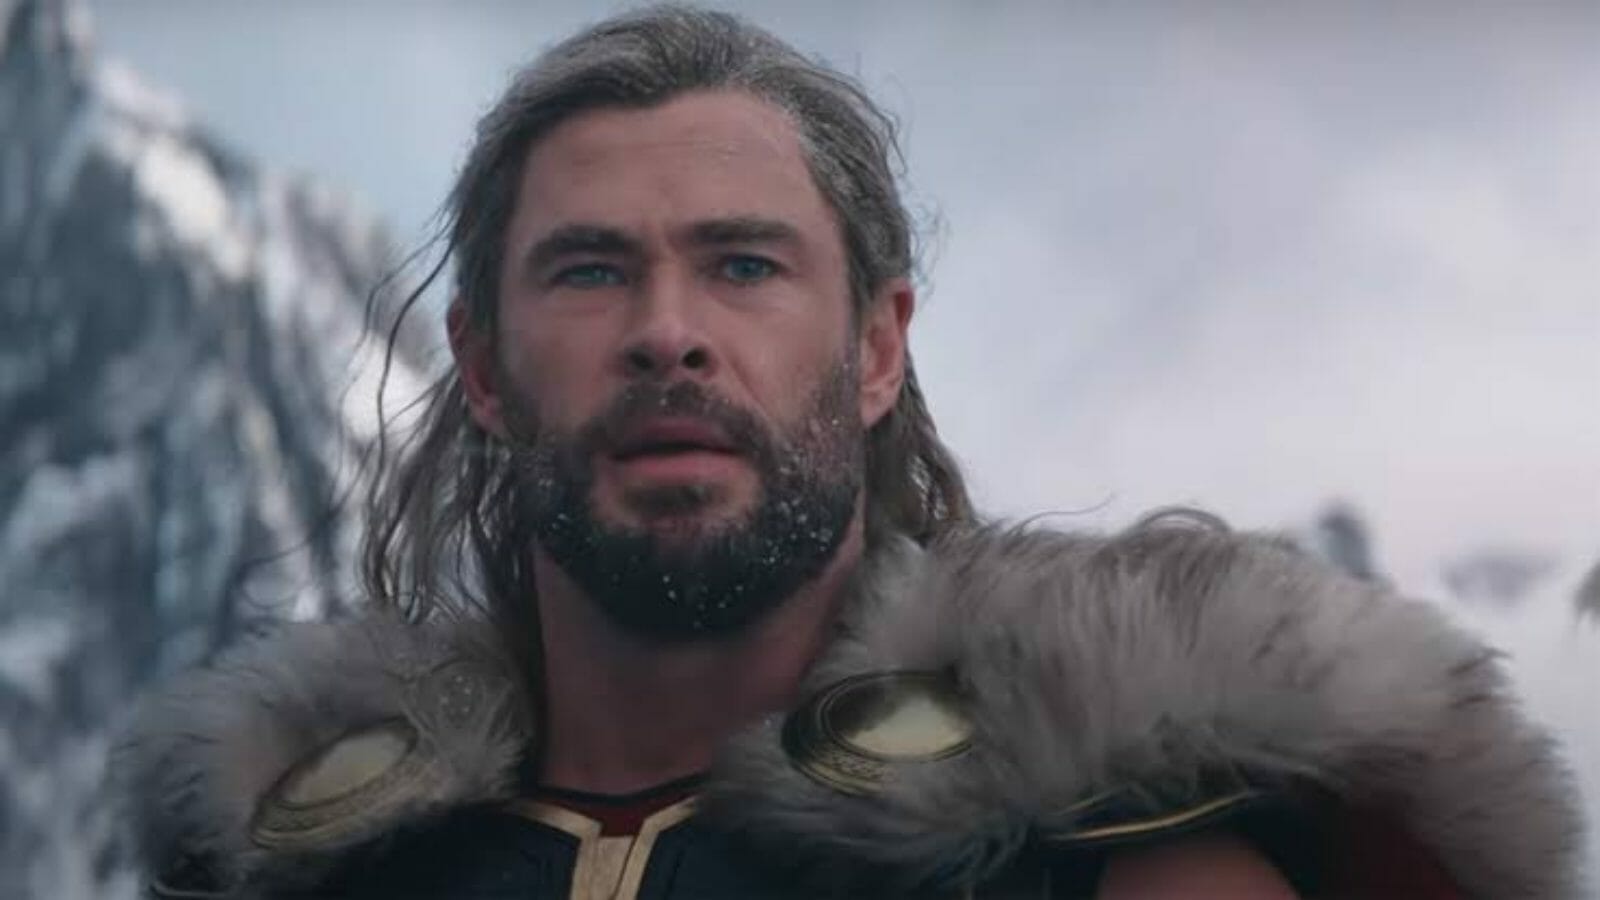 Chris Hemsworth talks about how he achieved his body